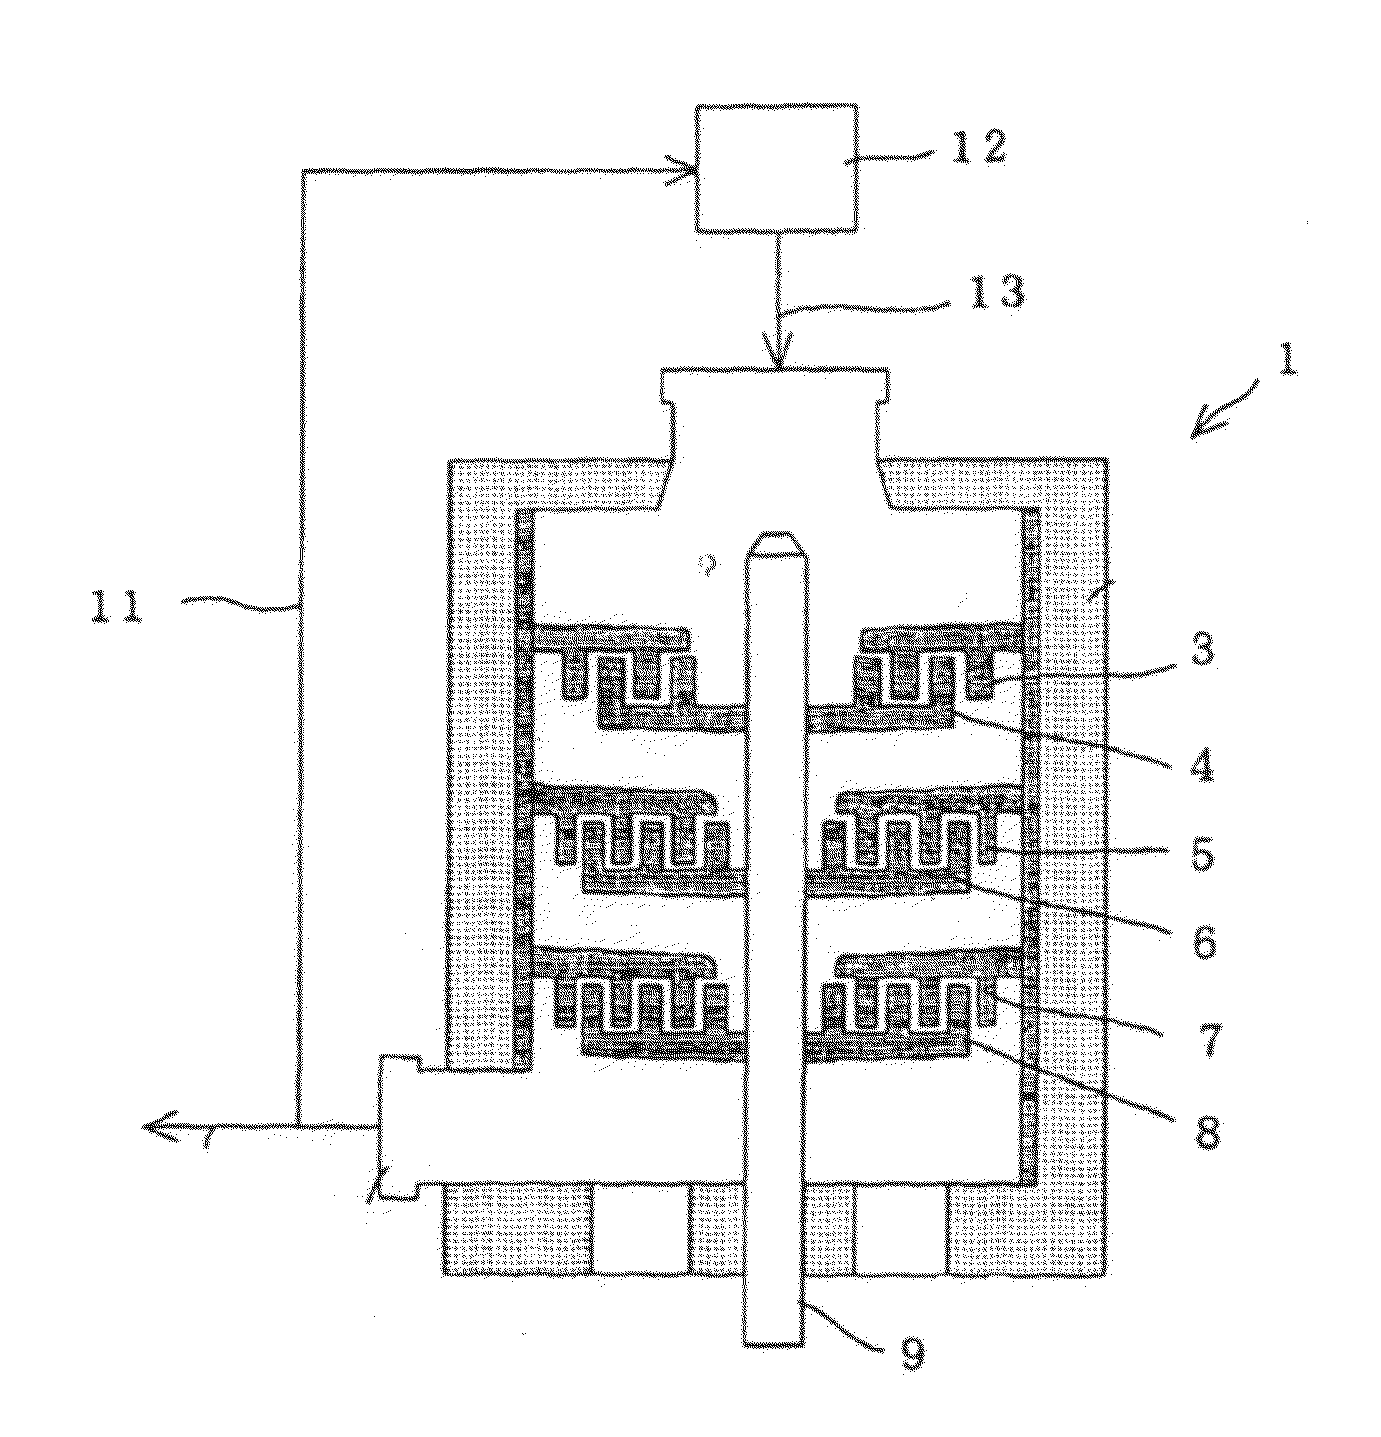 Arranging interaction and back pressure chambers for microfluidization